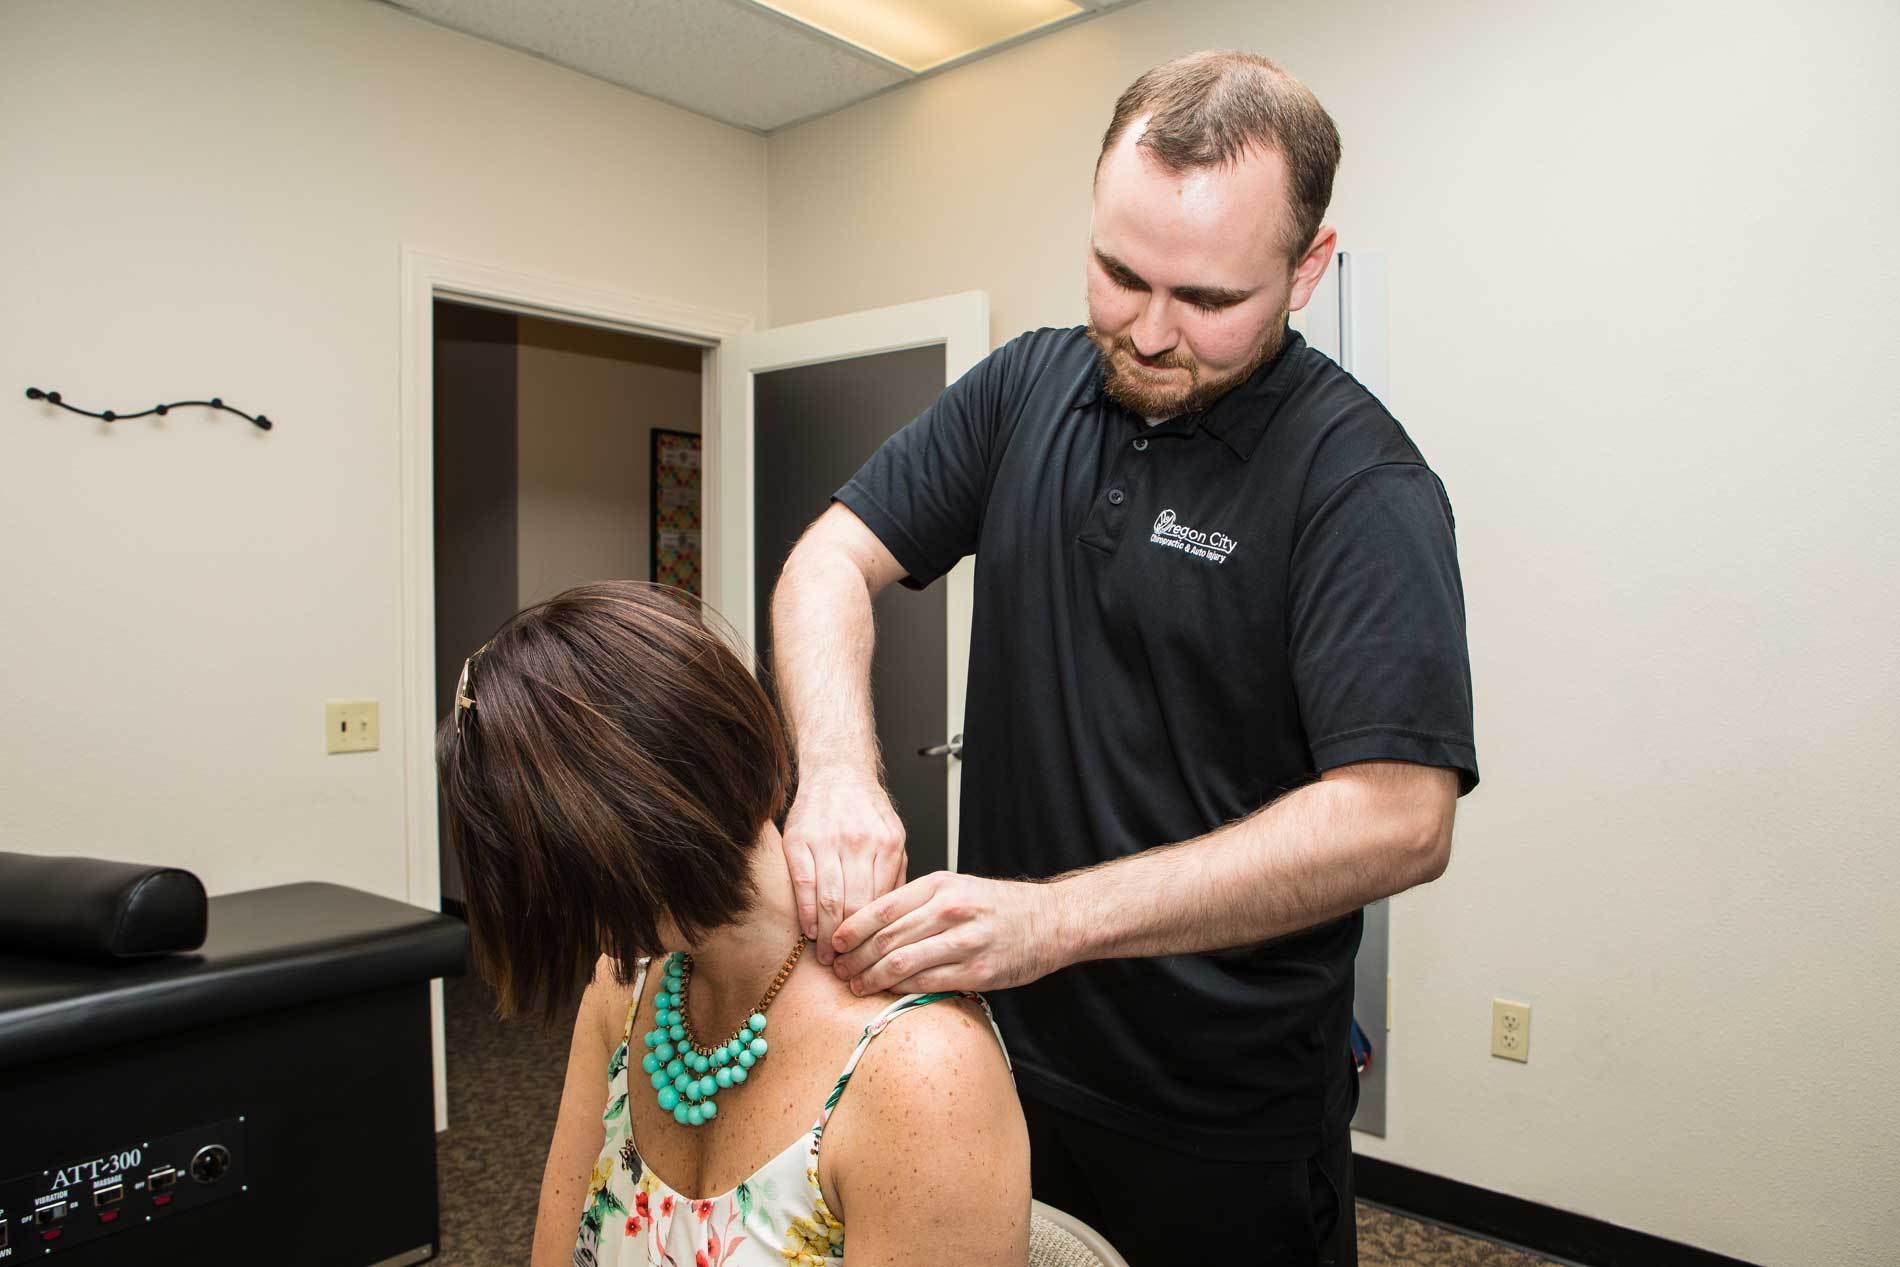 Oregon City Chiropractic and Auto Injury Adjustment and Pain Relief from Whiplash.